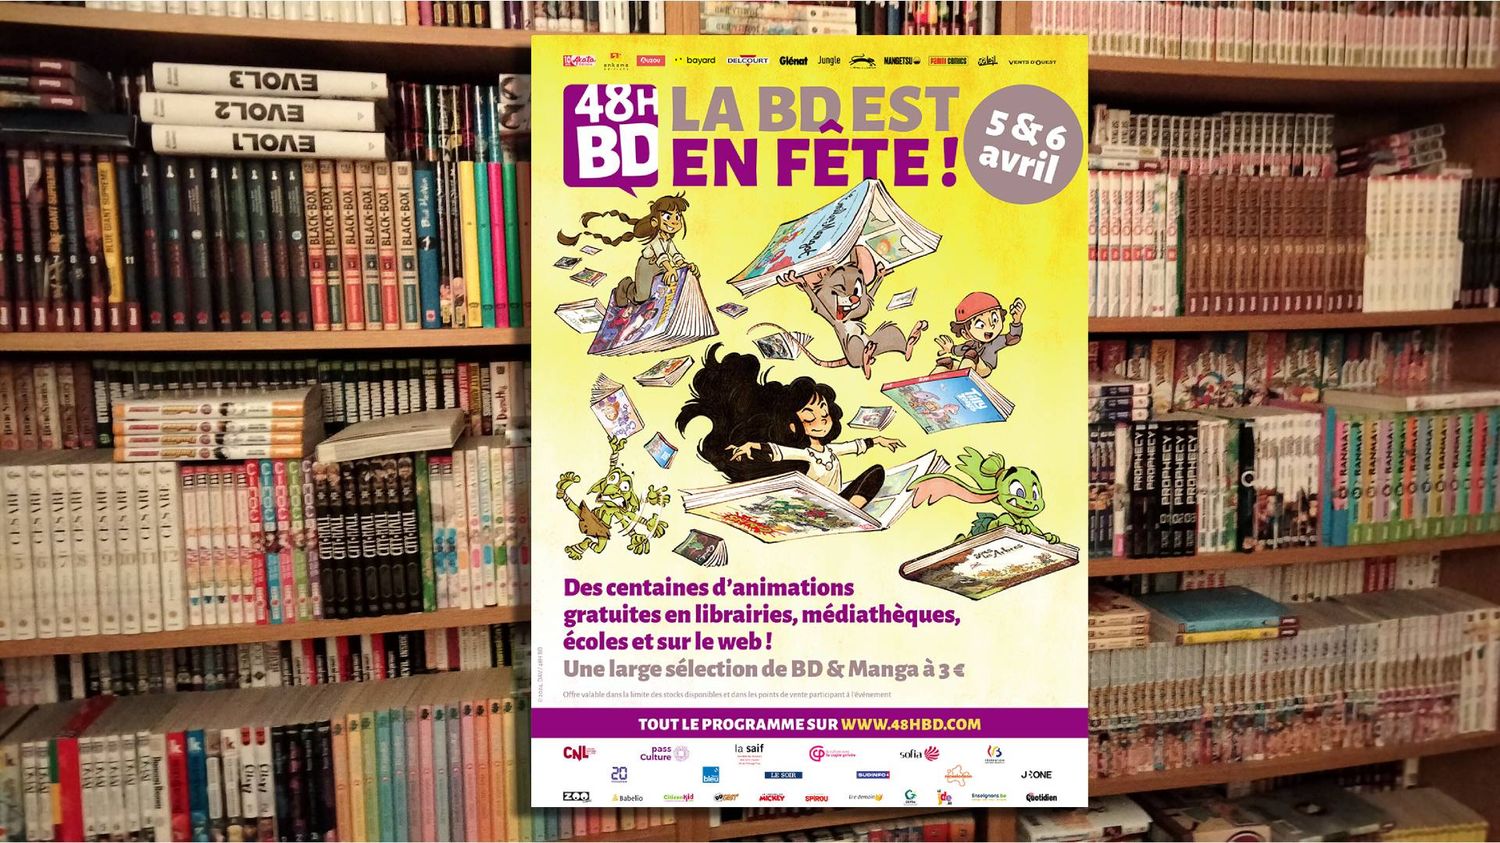 48 hours of comics: more than 500 animations and titles for 3 euros, April 5 and 6, 2024.